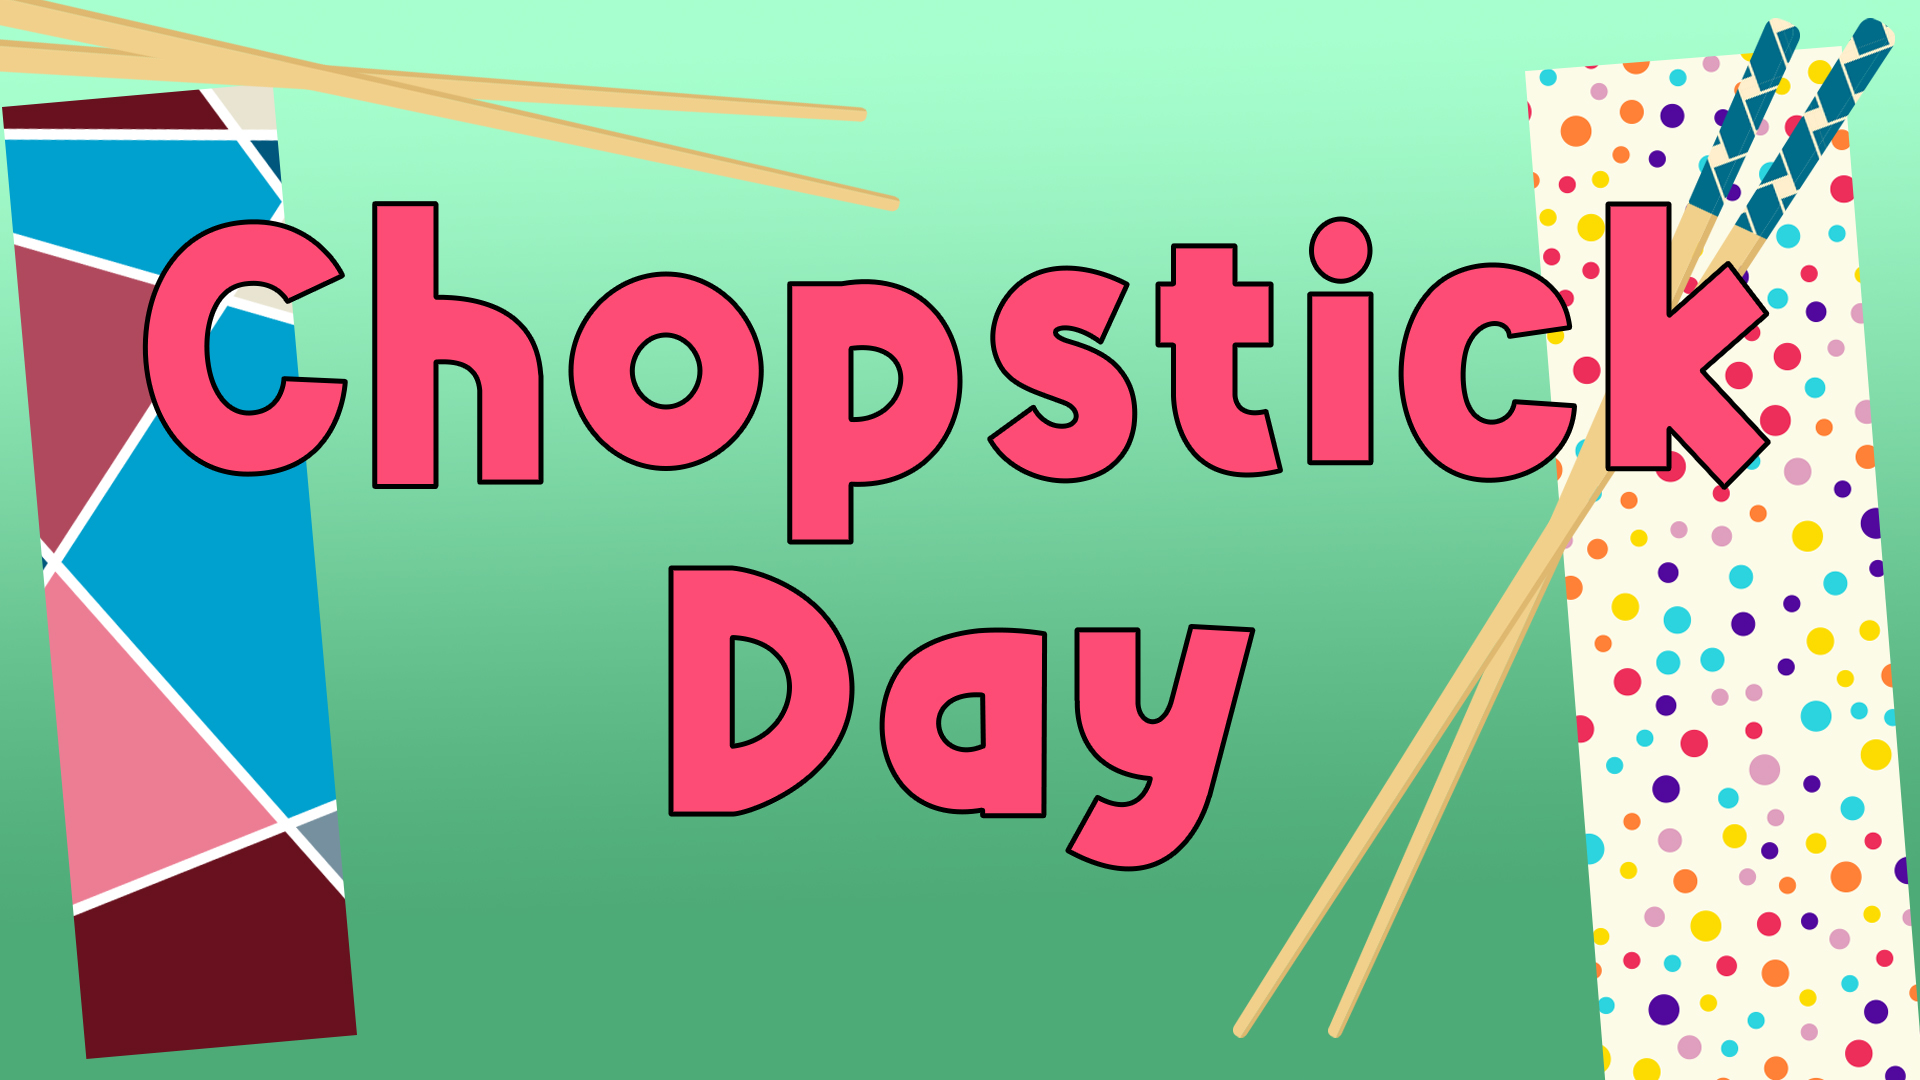 Image reads "Chopstick Day" against a green gradient background. There are two decorated boxes and two sets of chopsticks scattered among the image. 